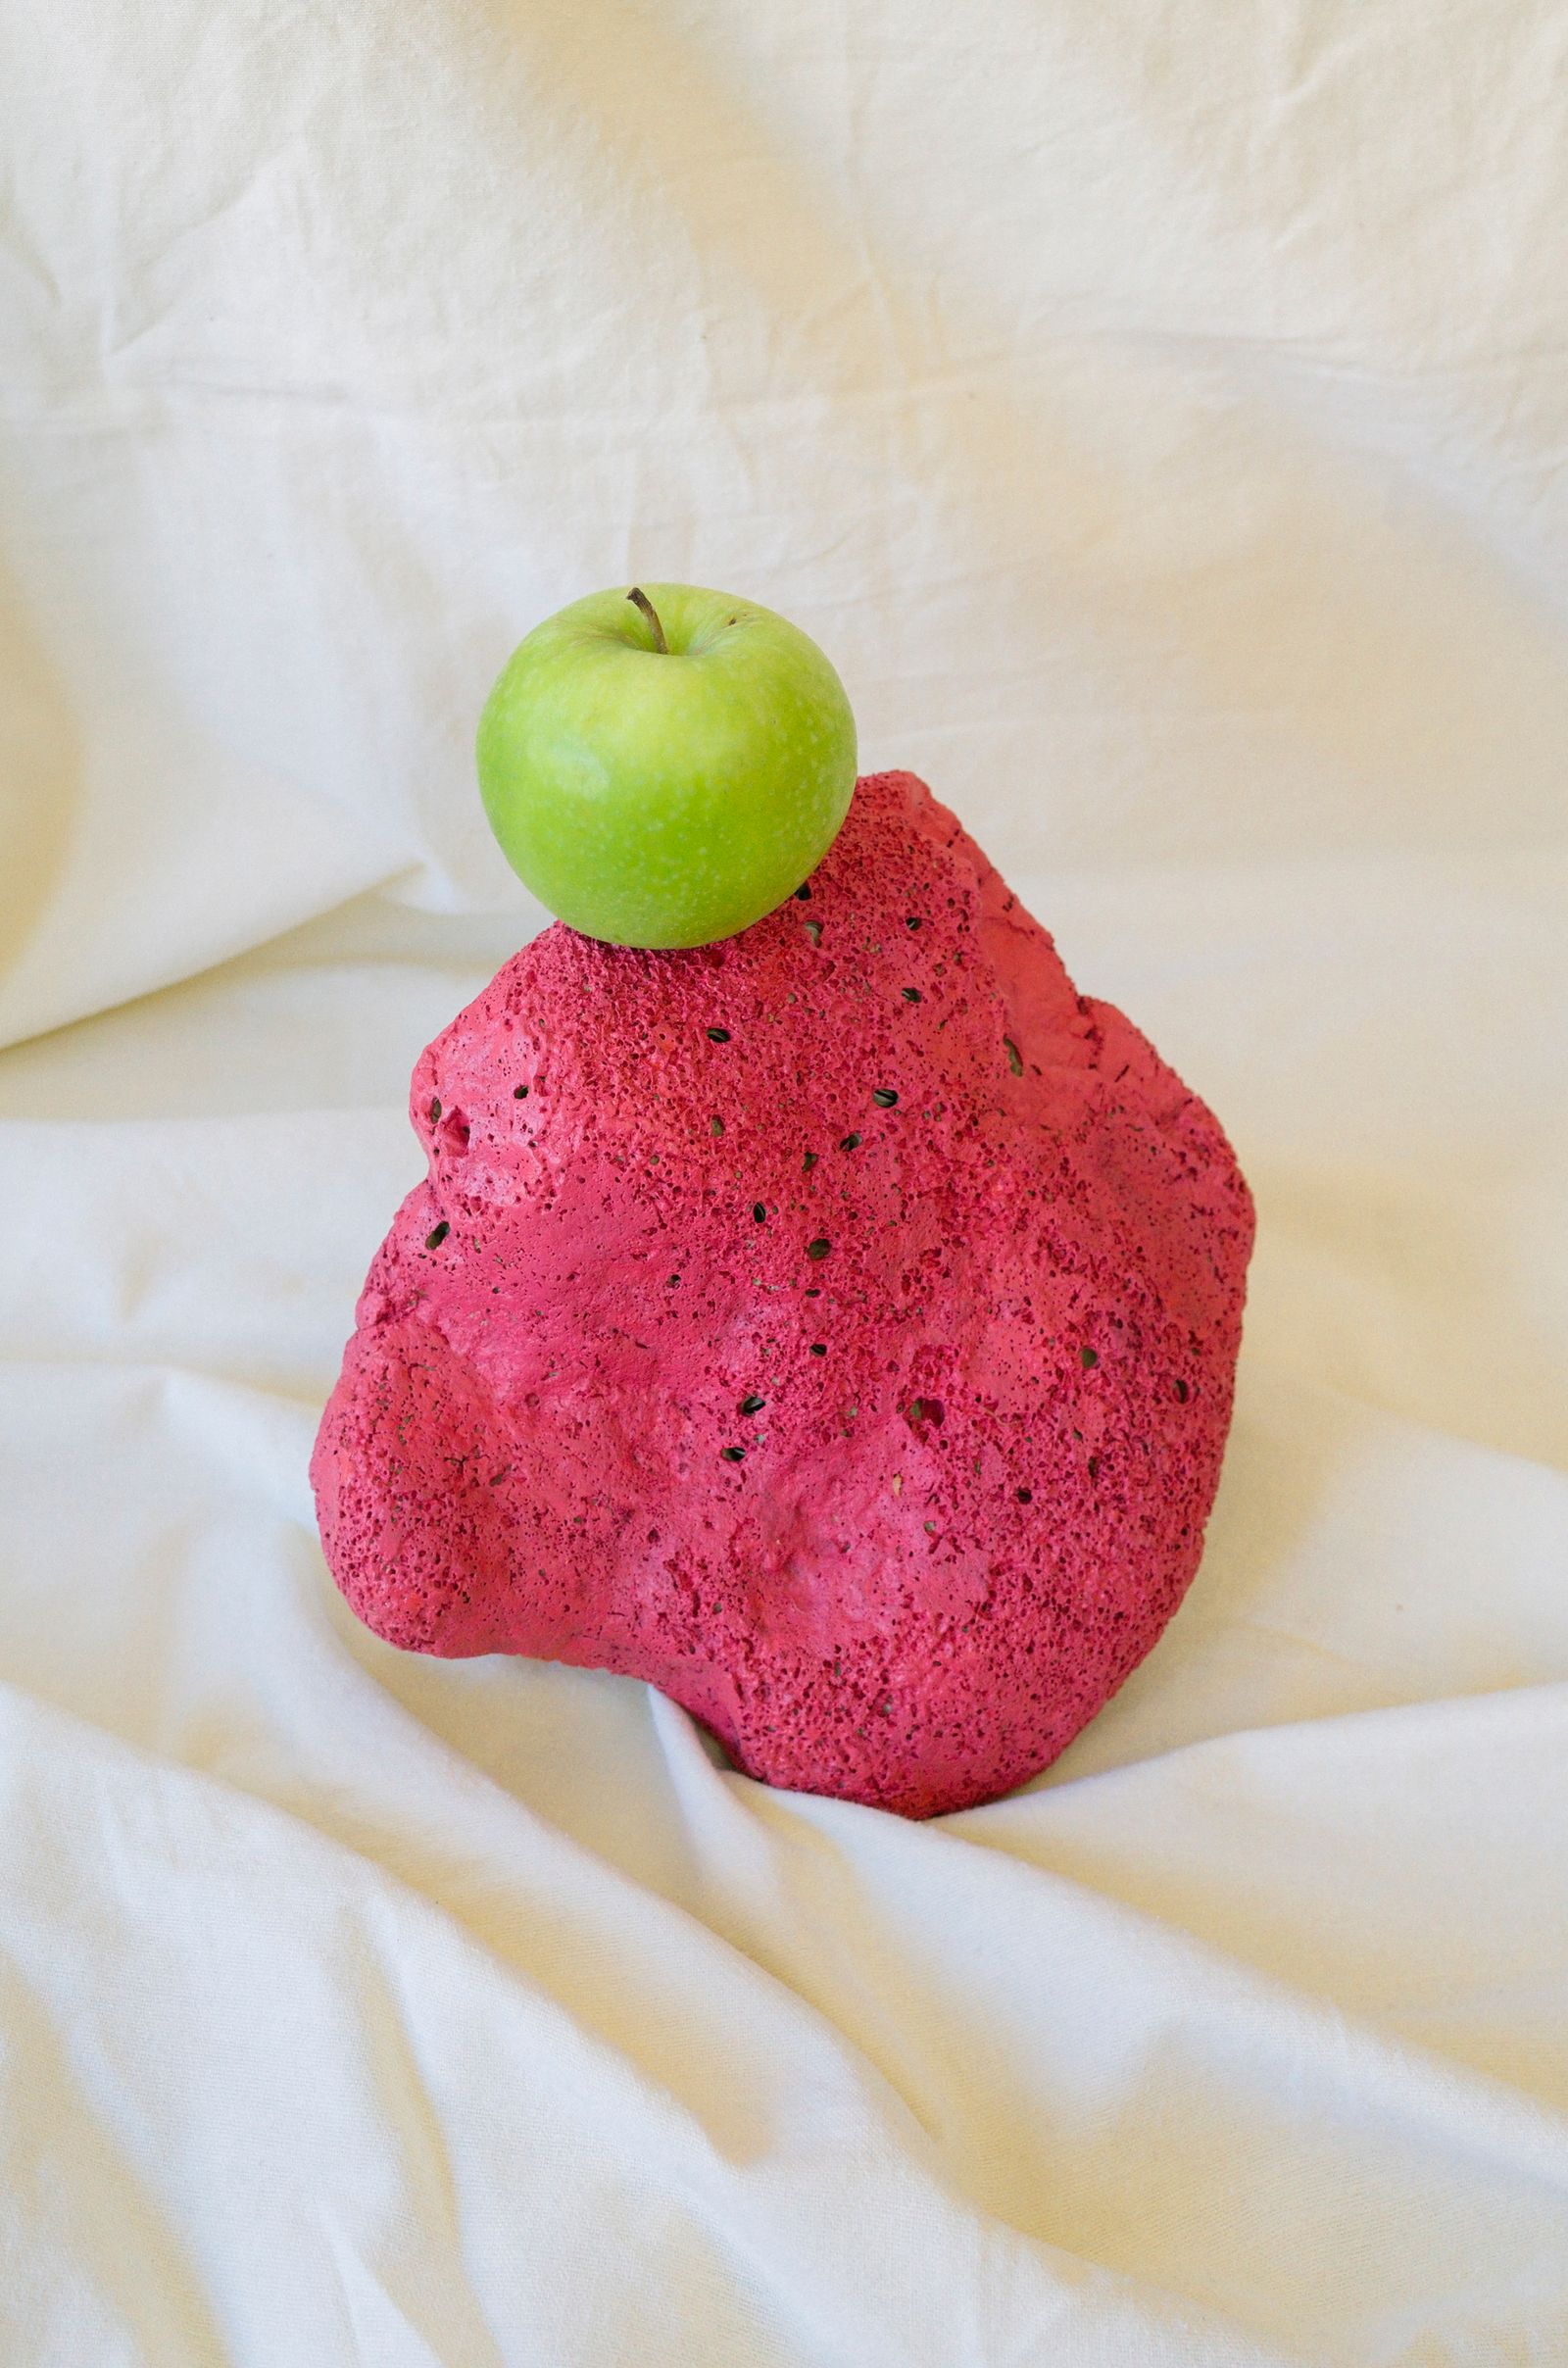 © Lucija Rosc - Homegrown apple on a painted stone.